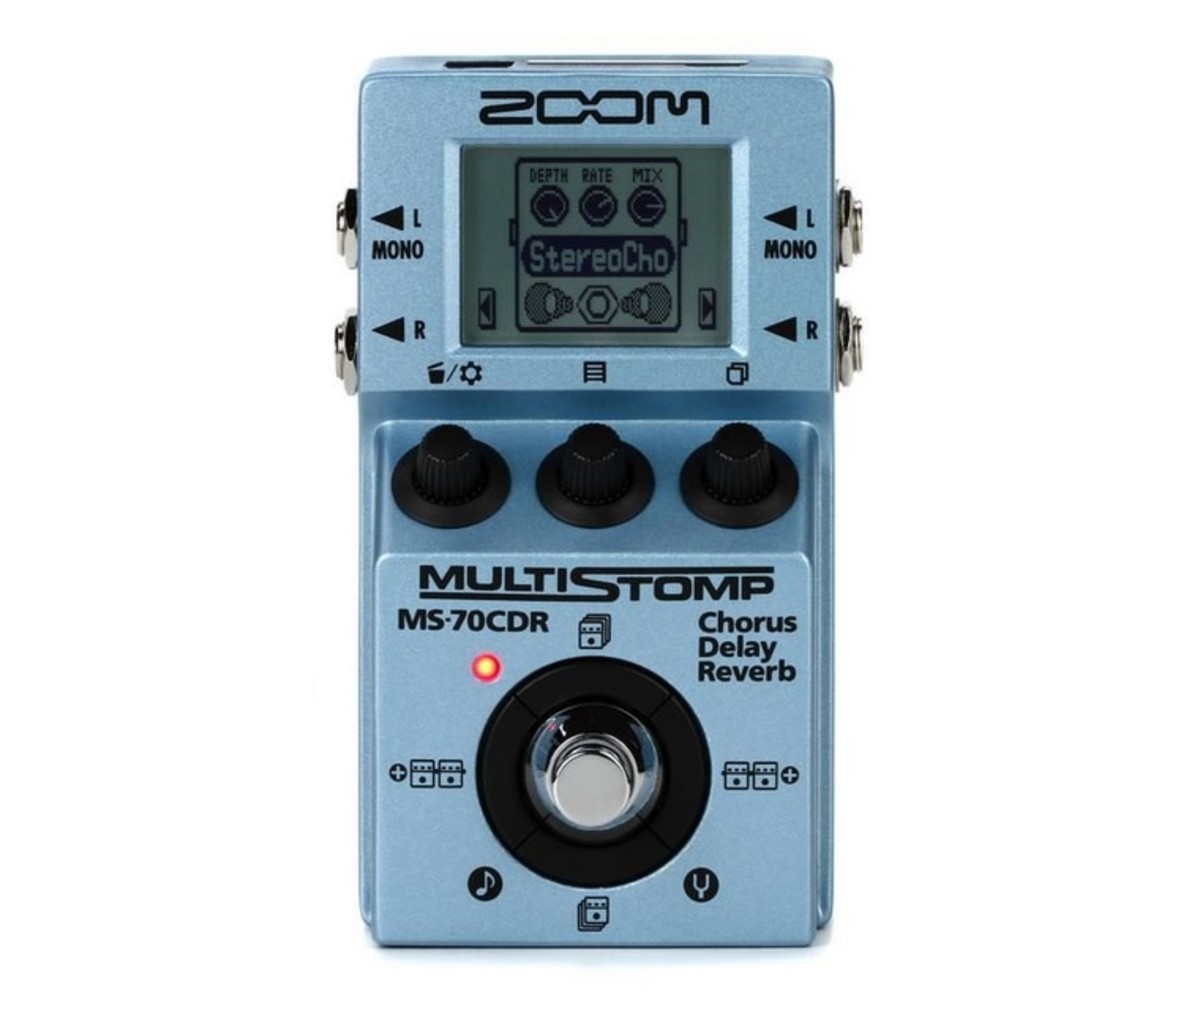 Review of the Zoom MS-70CDR MultiStomp Chorus/Delay/Reverb Pedal